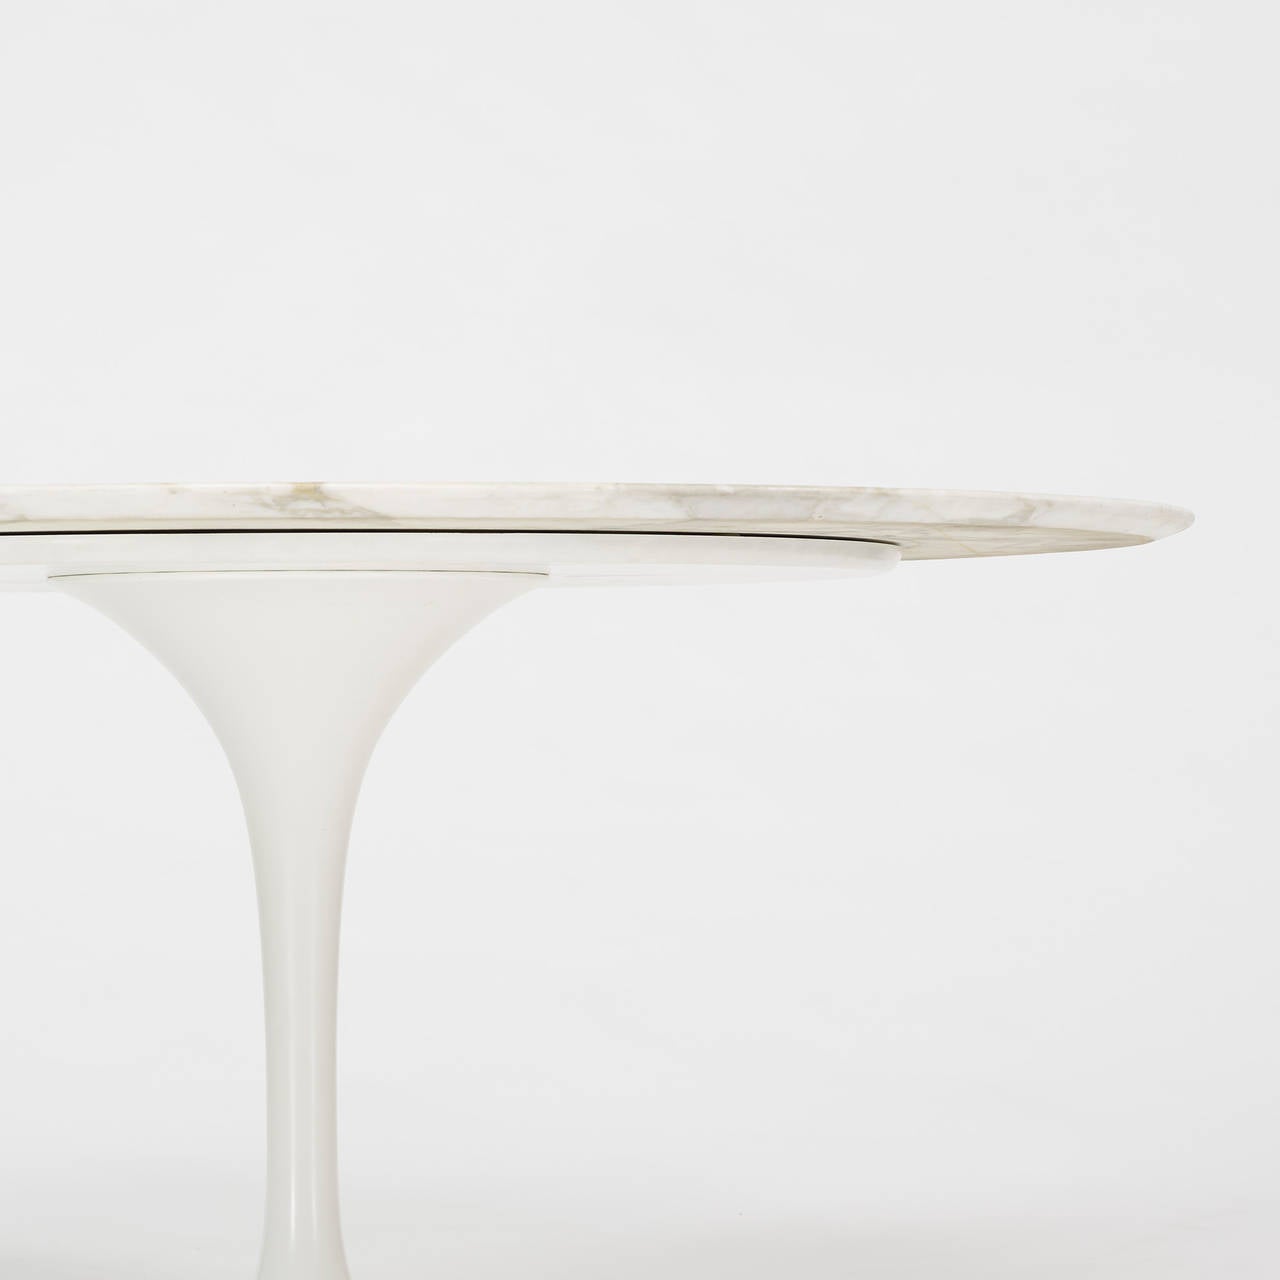 Signed with molded manufacturer's mark to underside of base: [Knoll International].